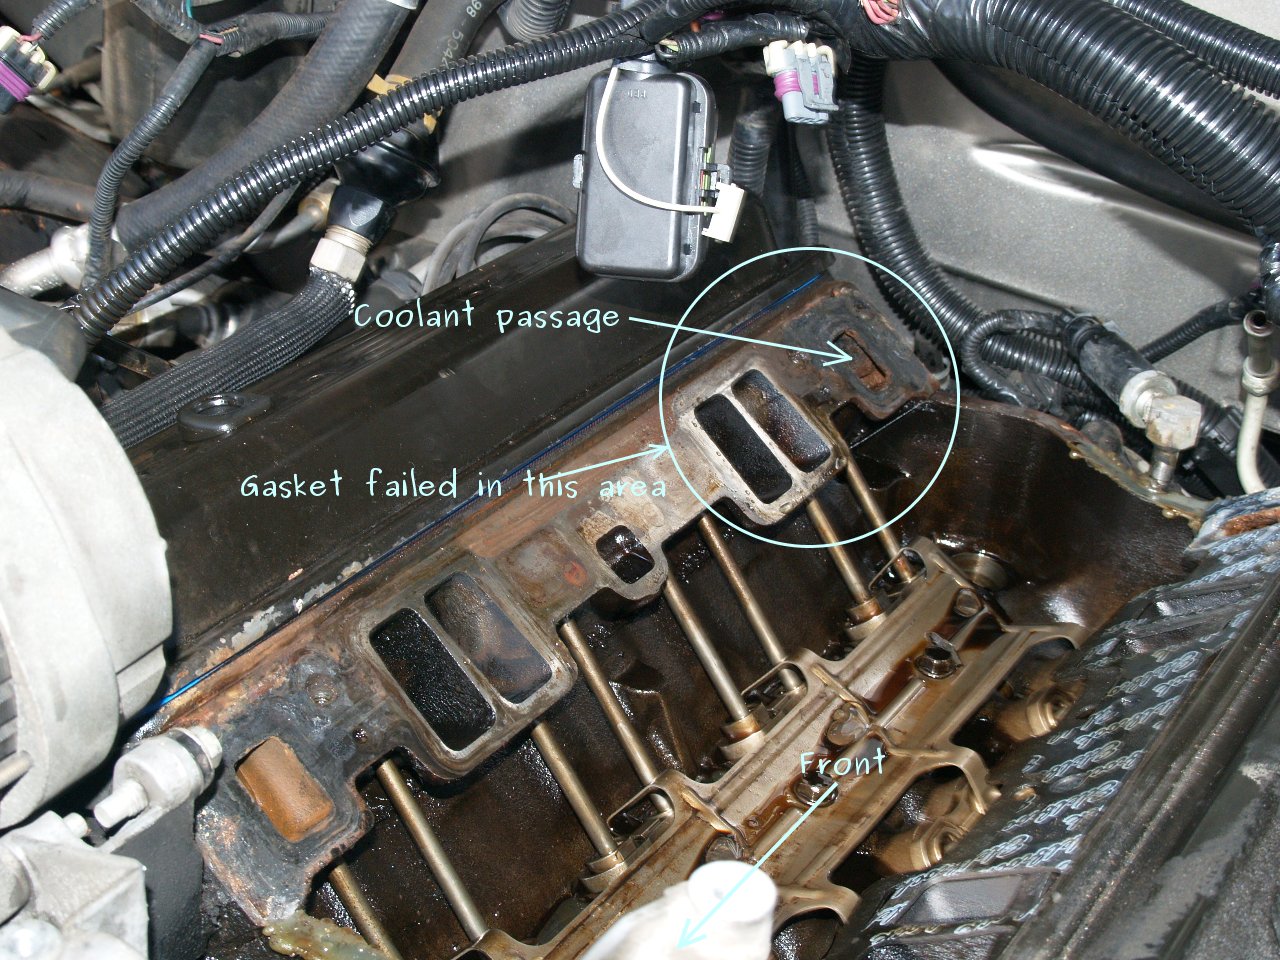 See P0918 in engine